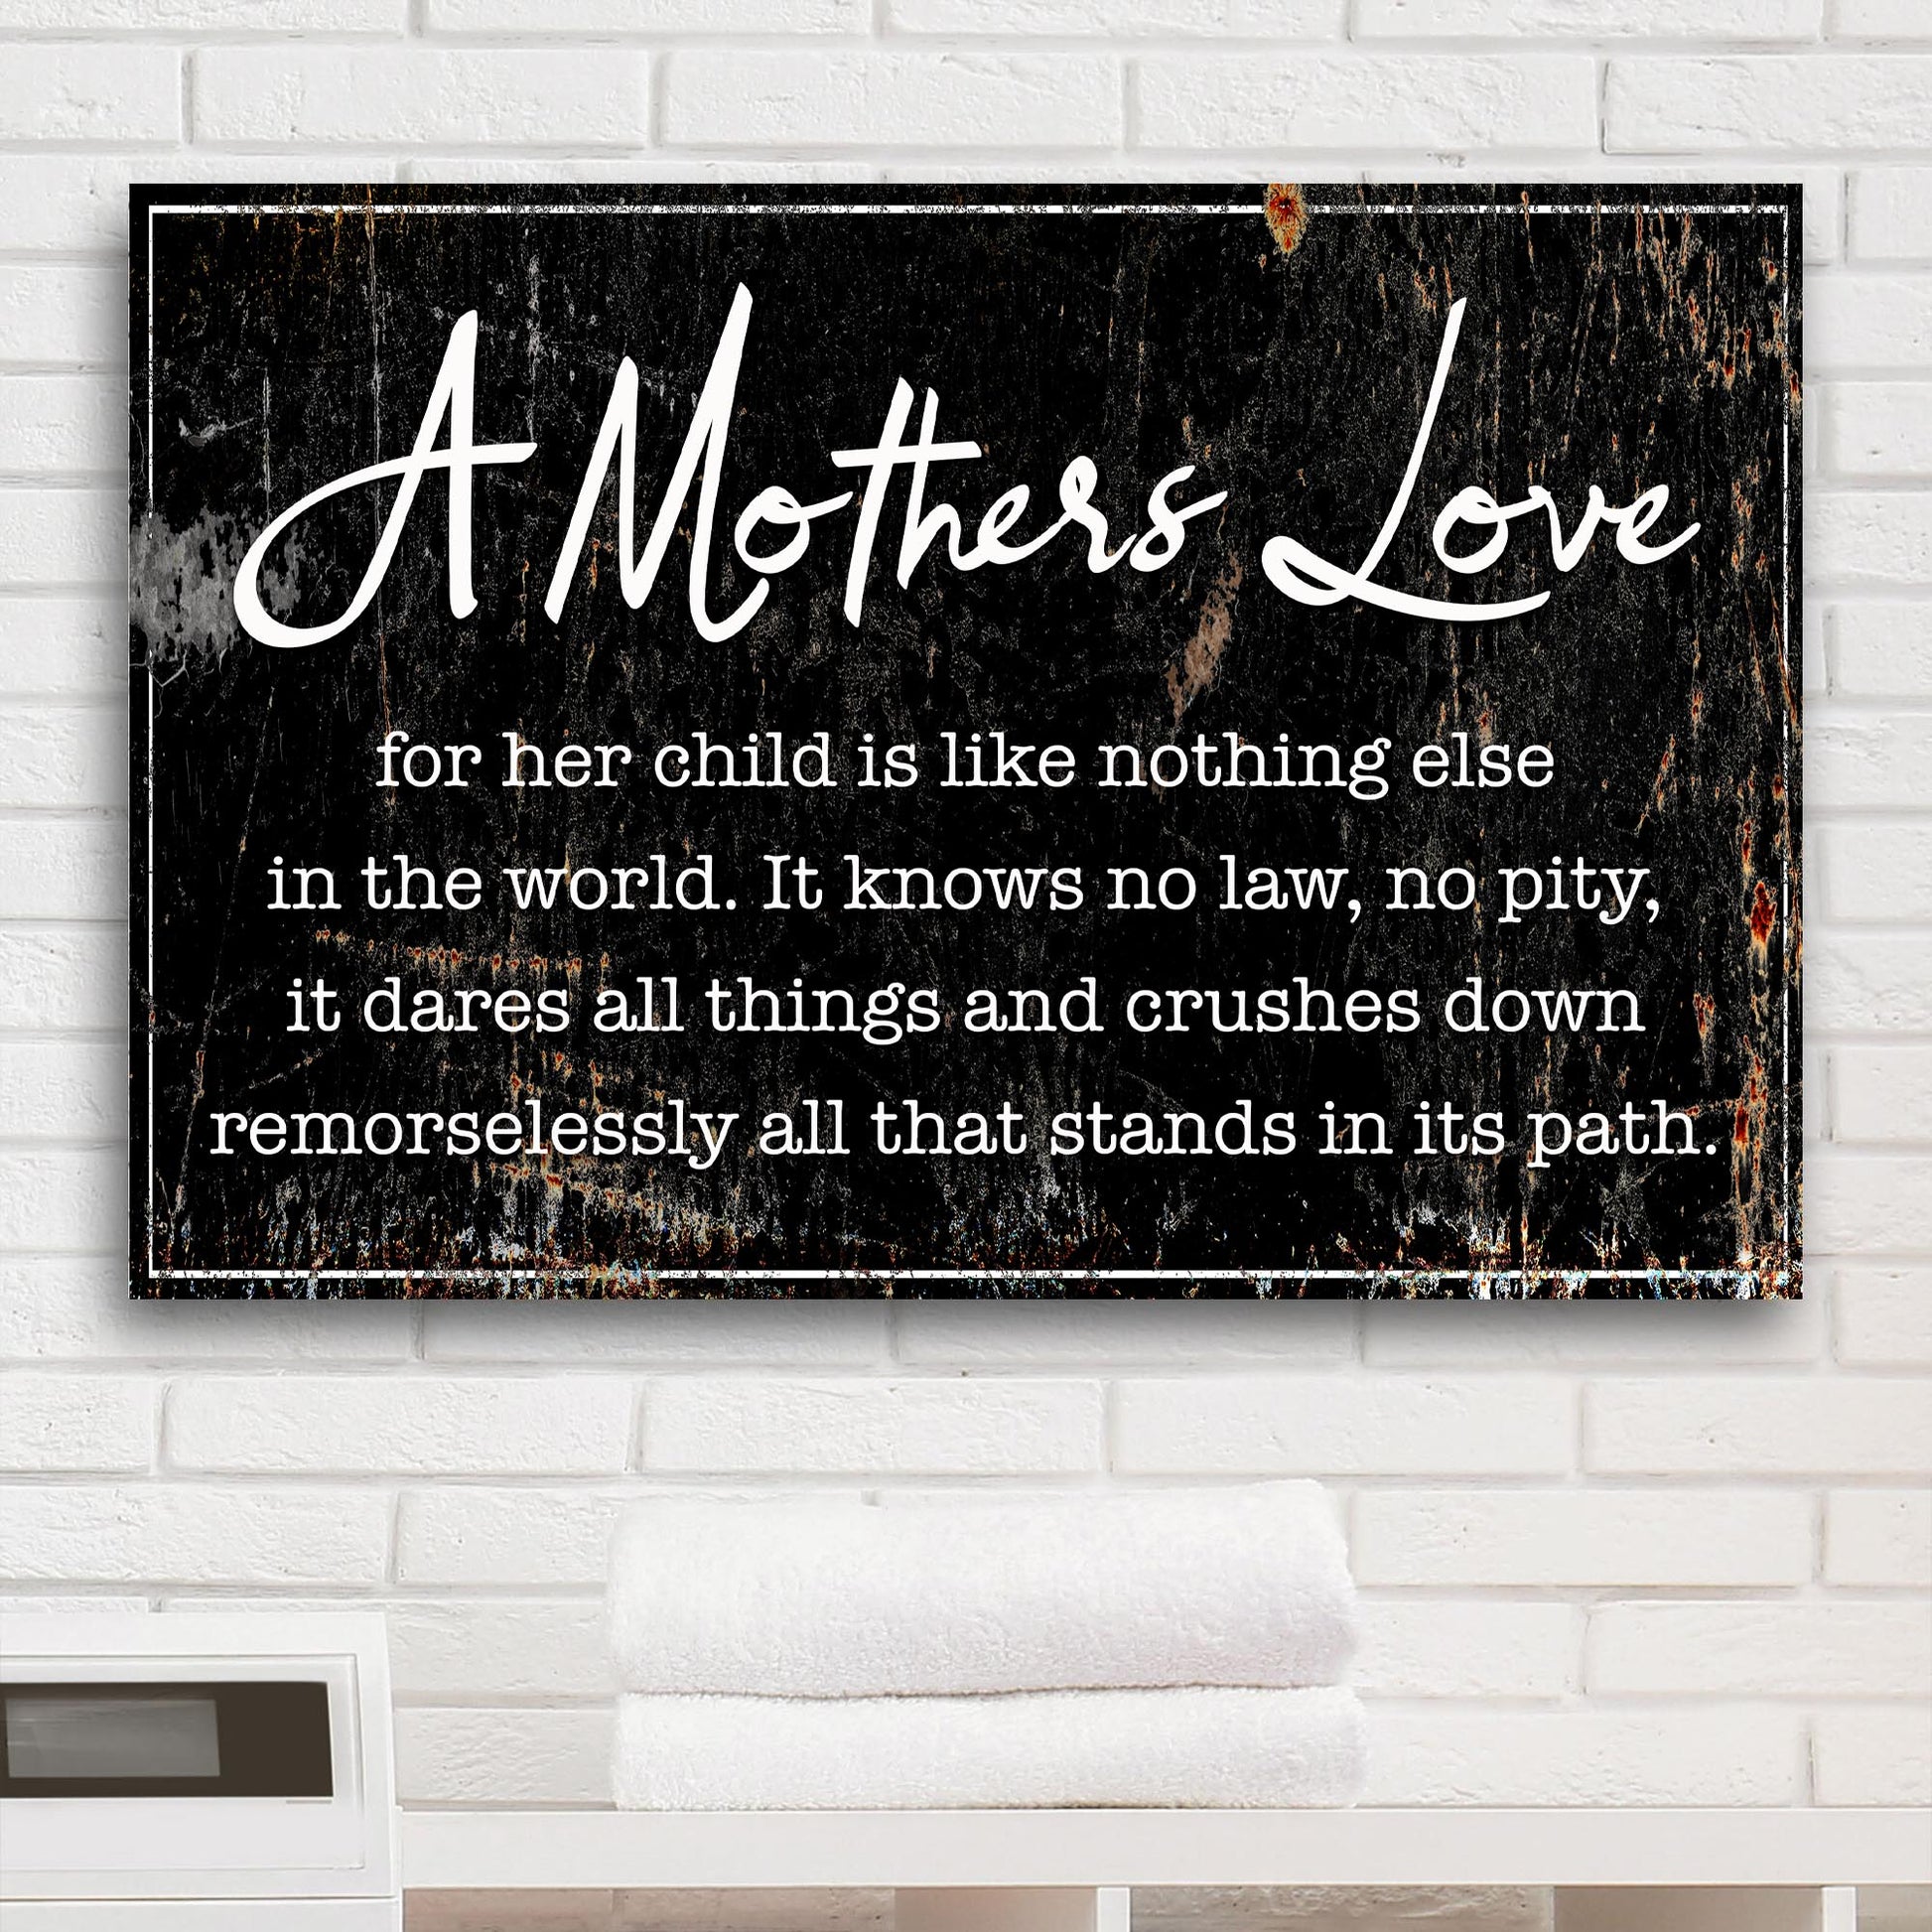 A Mother's Love Sign - Image by Tailored Canvases